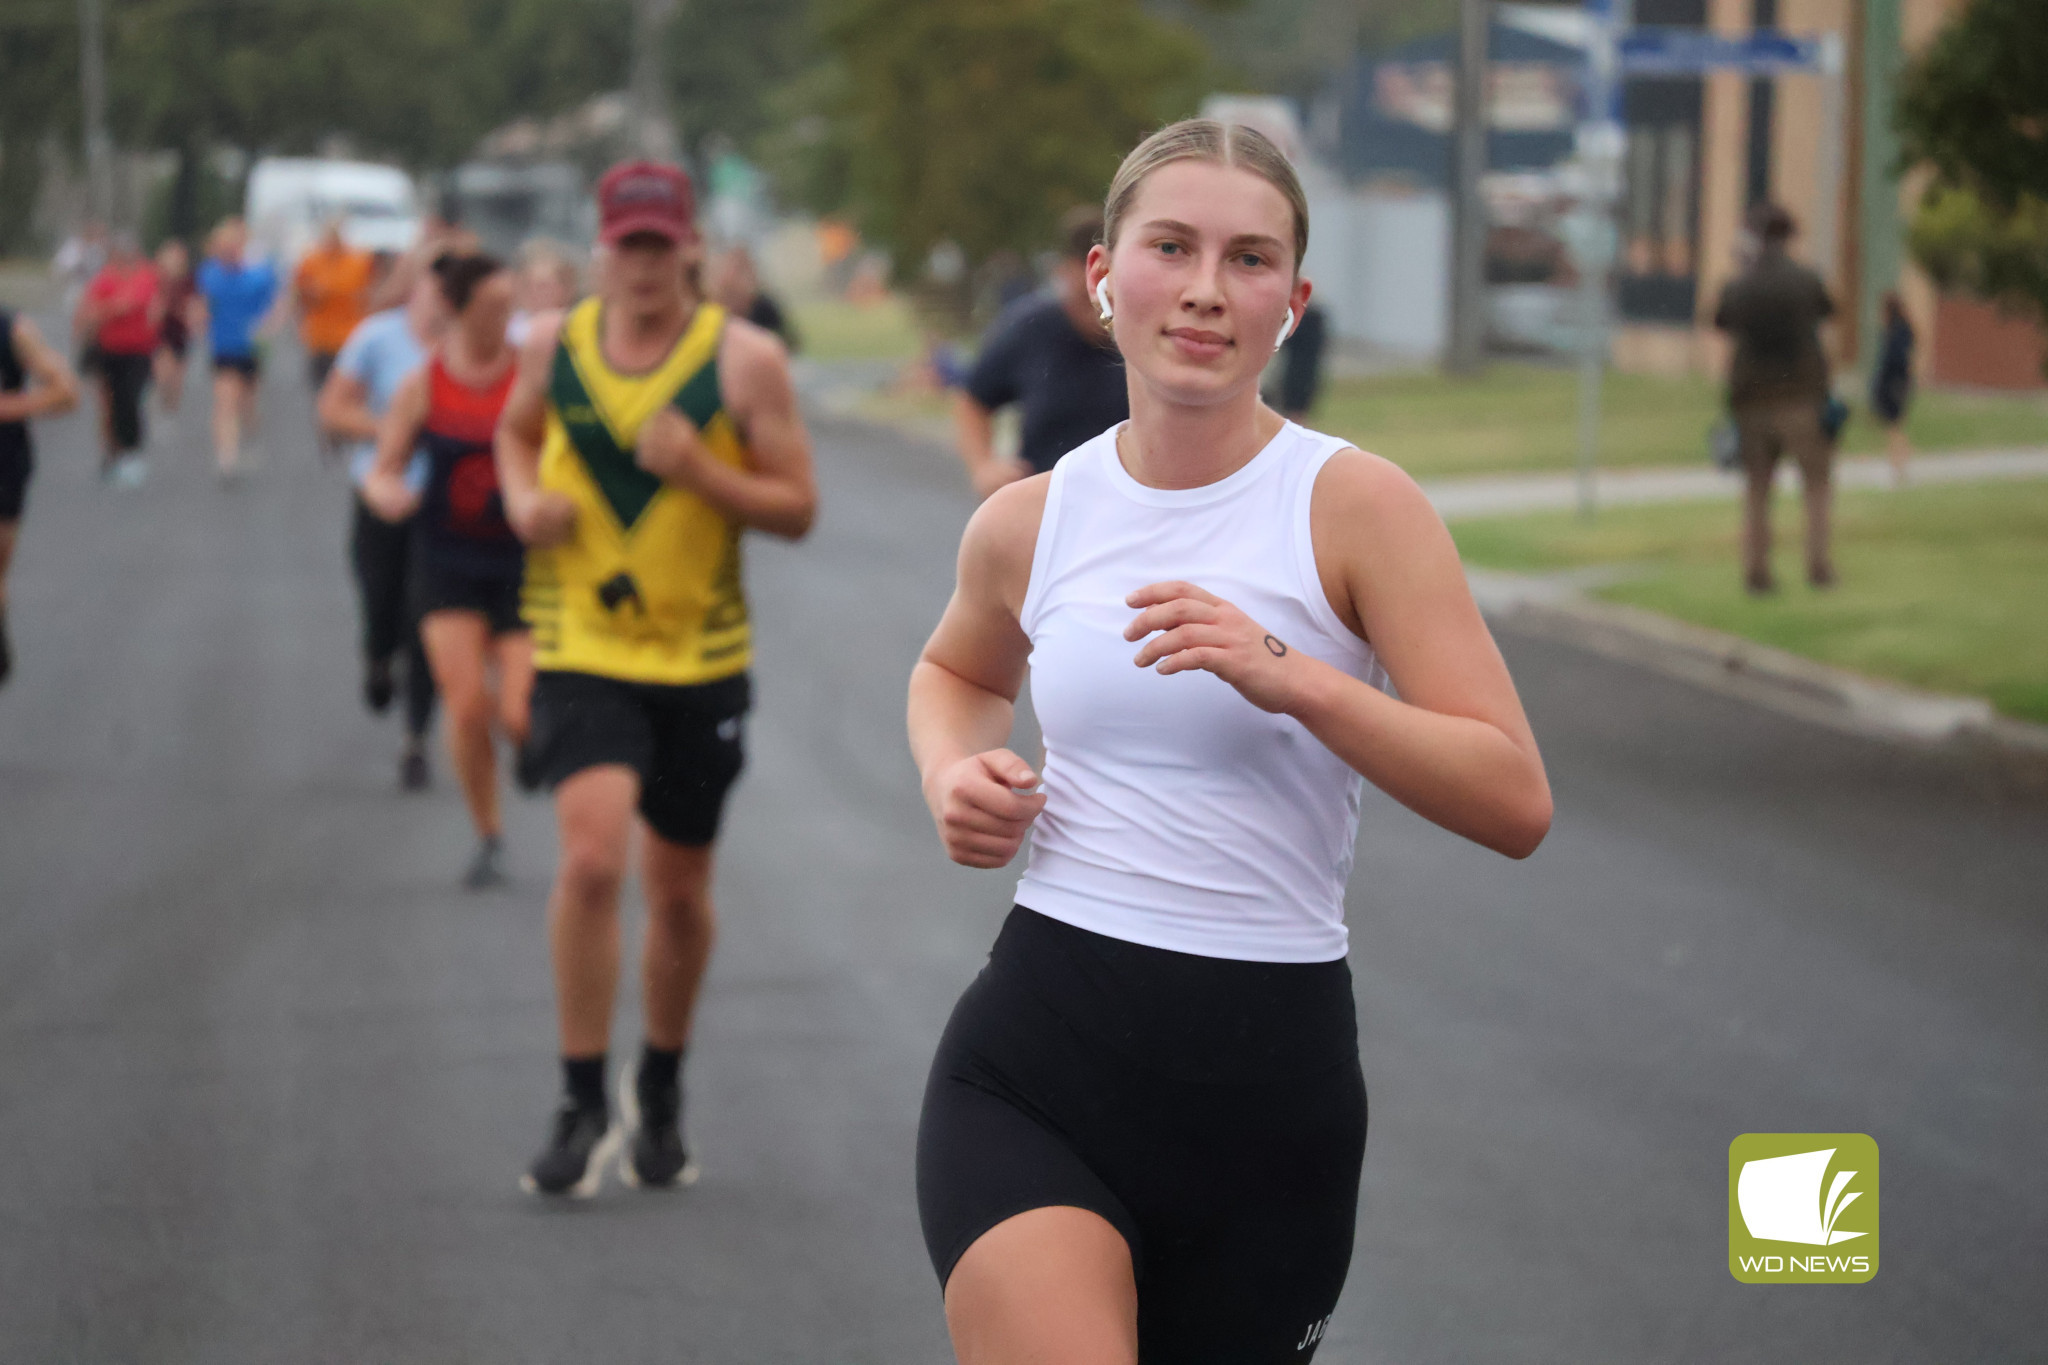 Still a winner: The Terang and District Lions Club’s 42nd annual Noorat to Terang Fun Run and Walk drew hundreds of entries last Friday to mark another successful year.